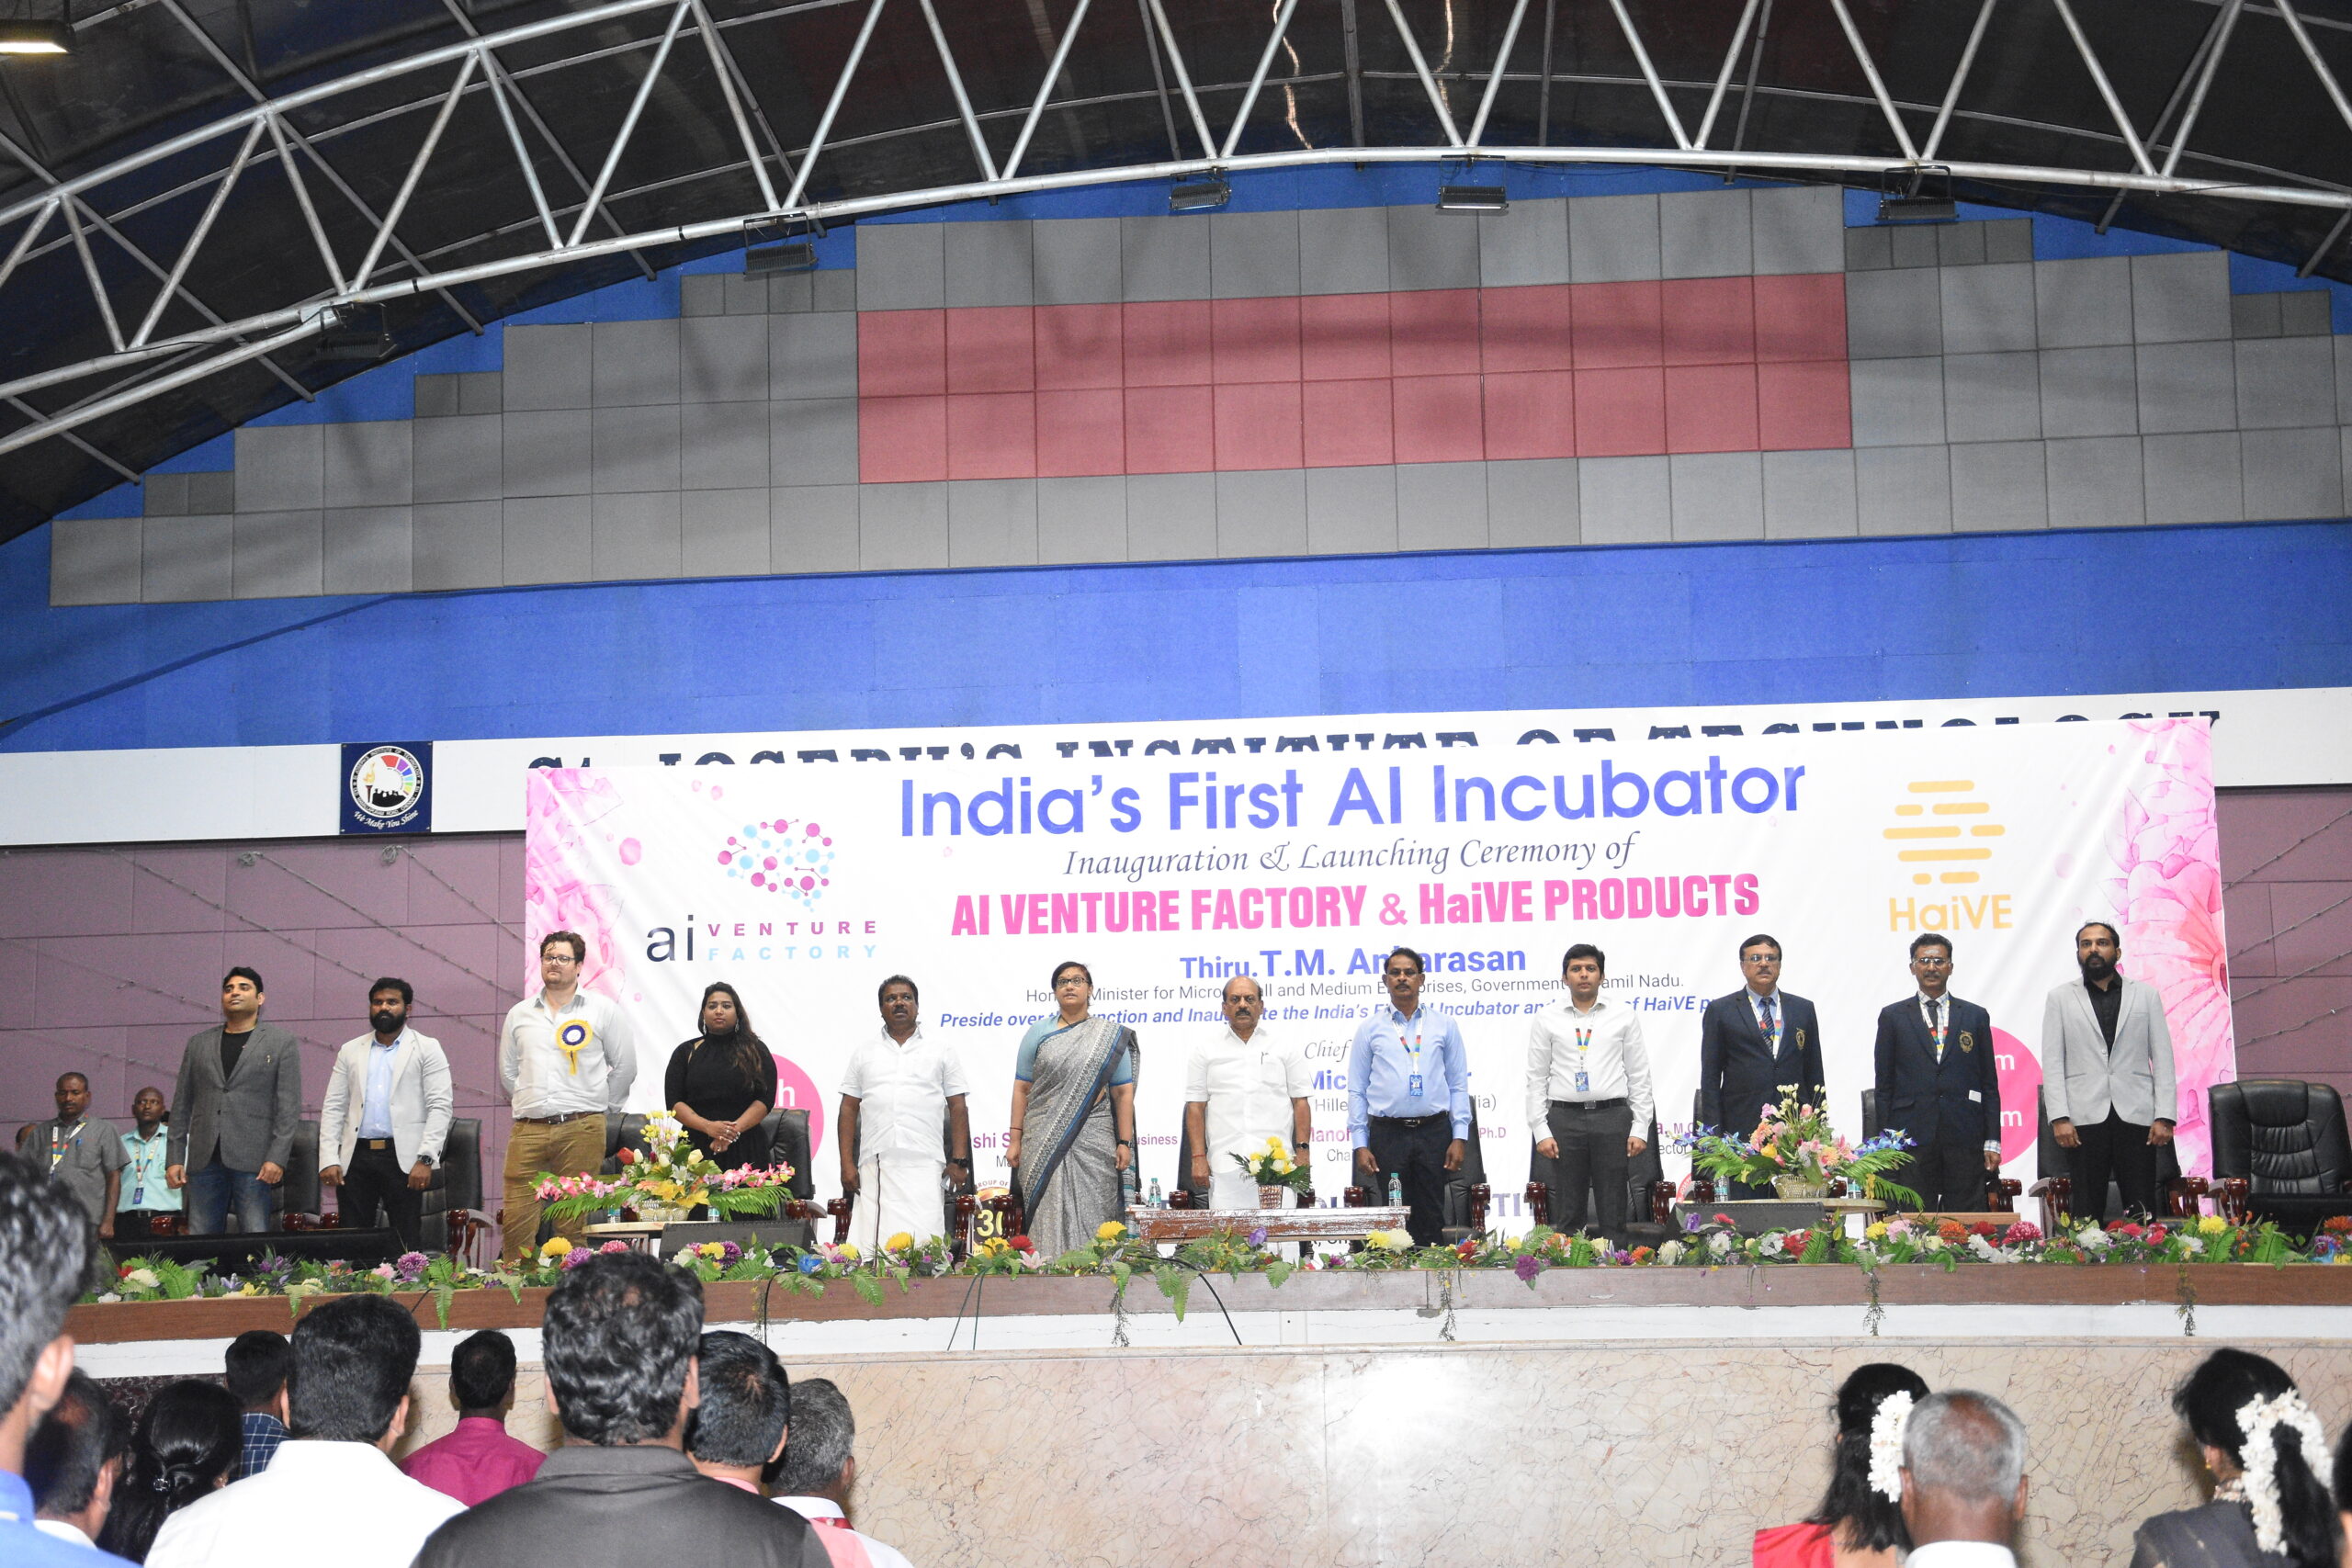 Anbarasan, Minister for MSME, launched AI Venture Factory – India’s first AI Technology Business Incubator powered by HaiVE and hosted at St Joseph’s Group of Institutions